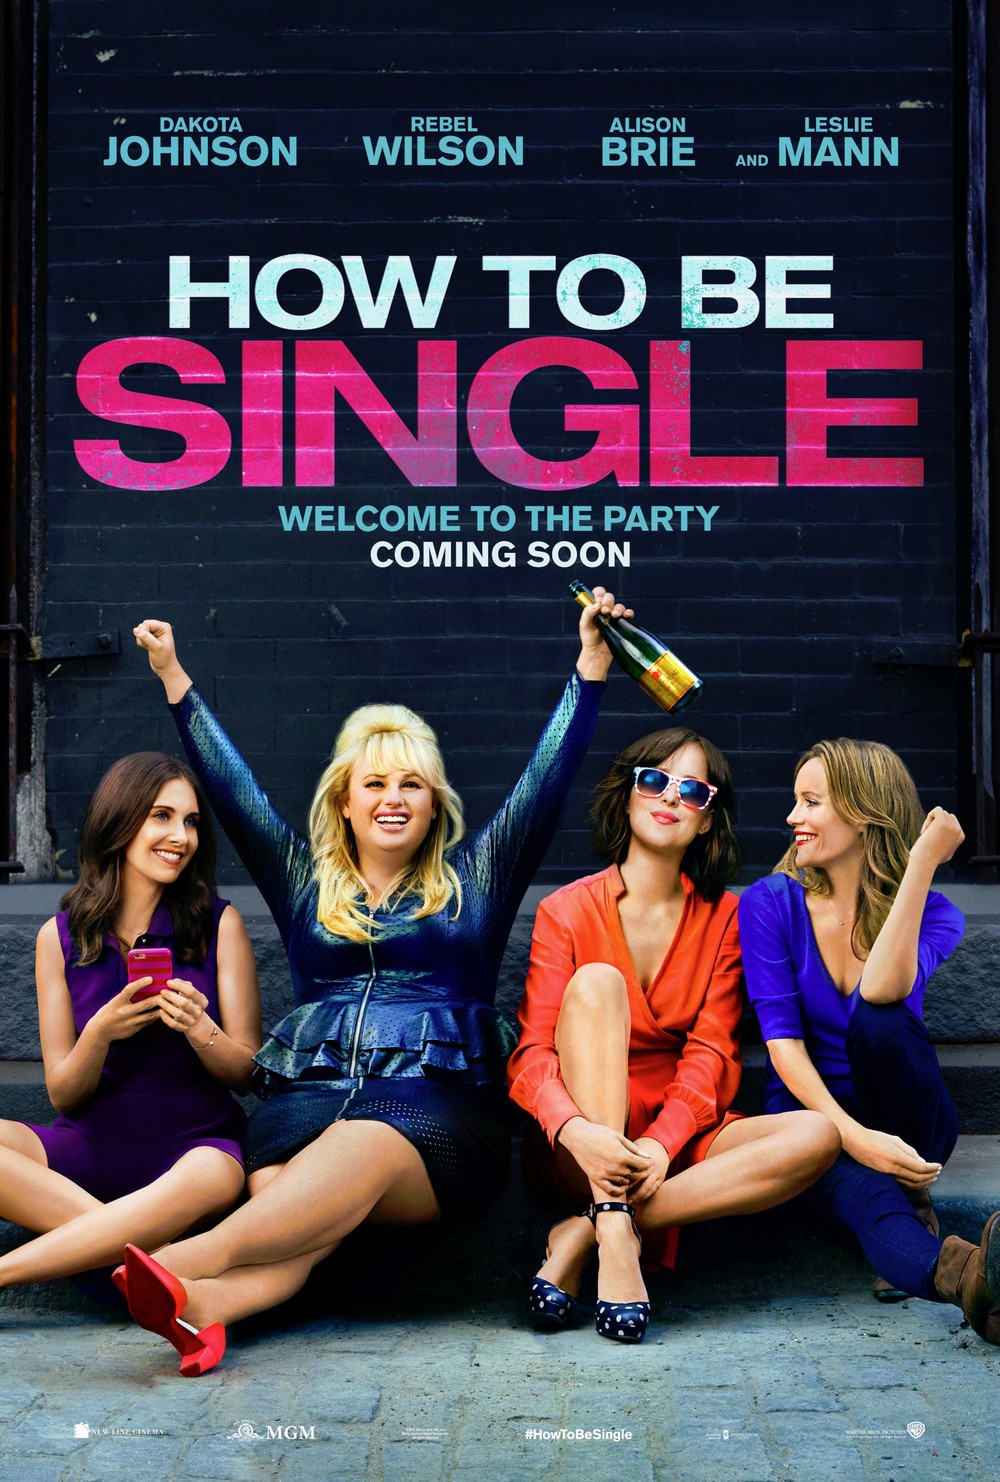 How to Be Single DVD Release Date | Redbox, Netflix, iTunes, Amazon